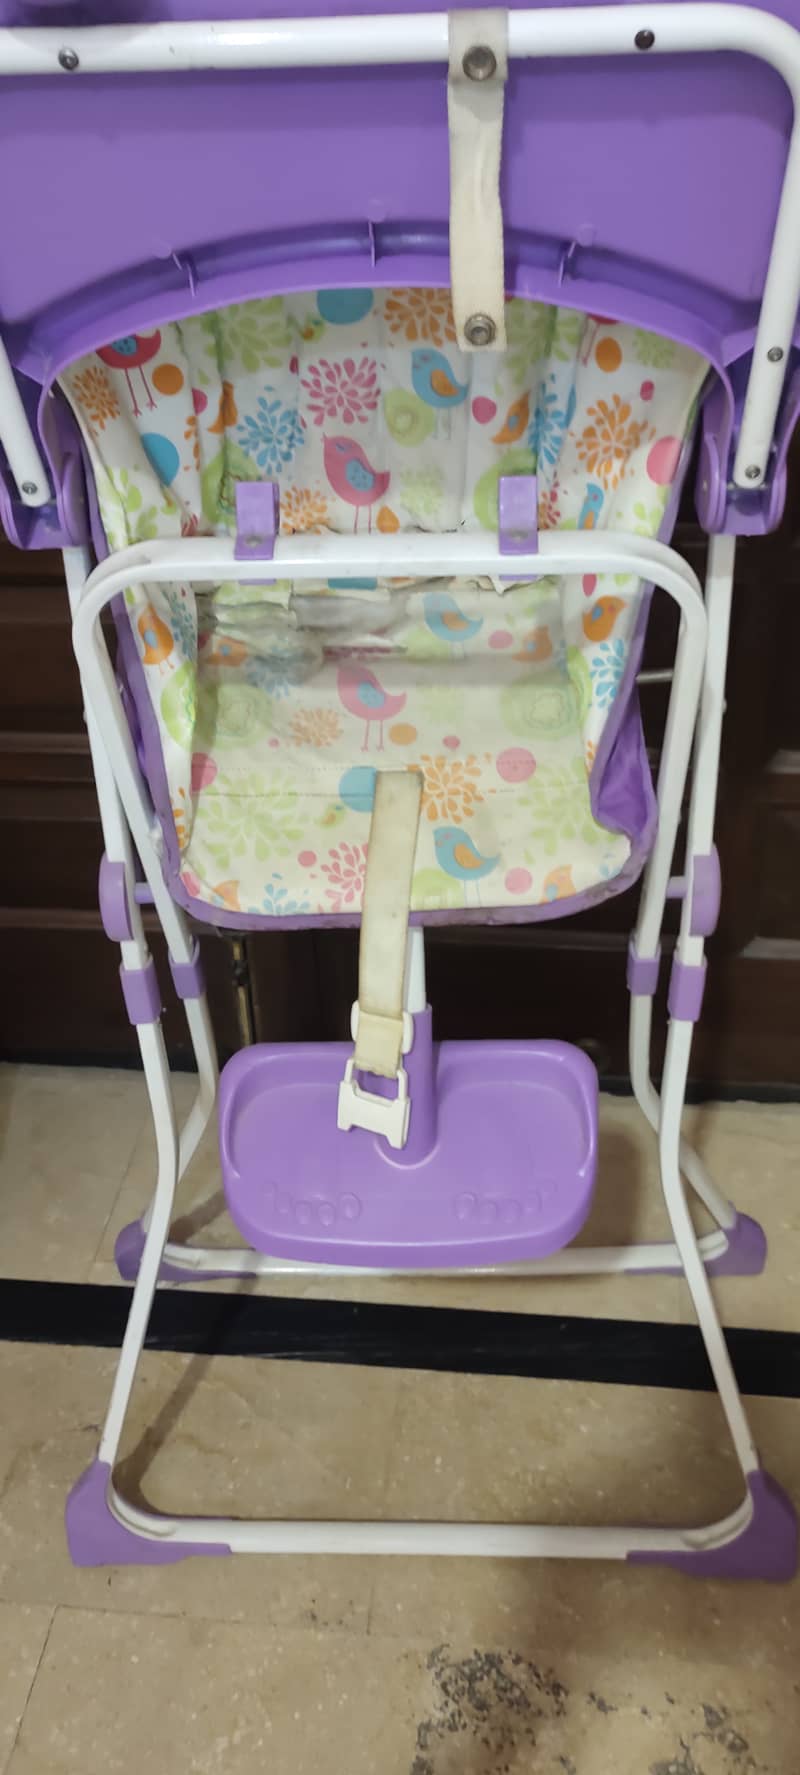 BABY DINNING CHAIR - (FOLDABLE) GOOD CONDITION 6